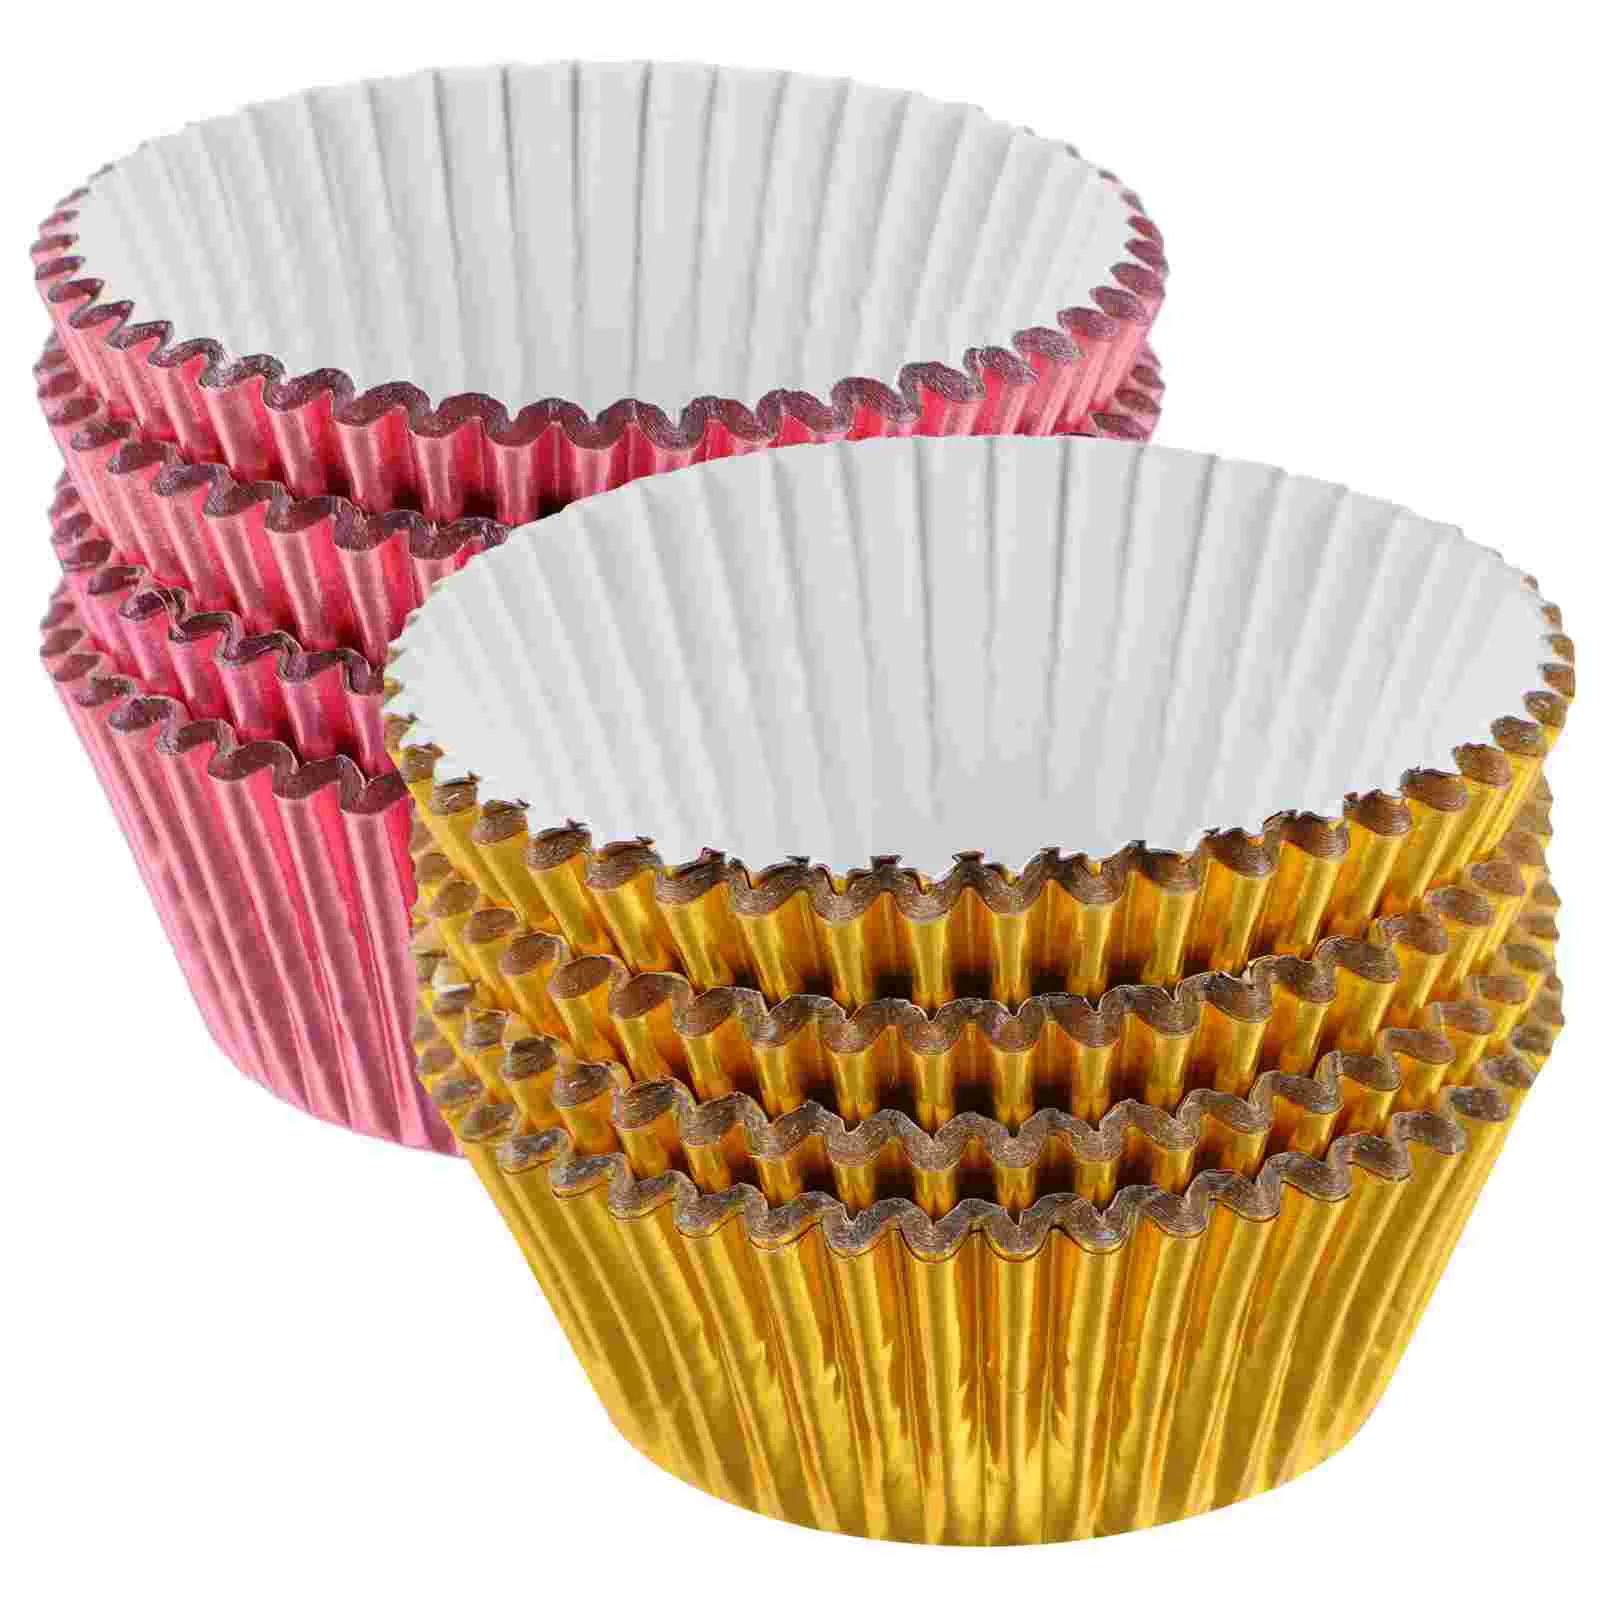 2 Boxes Muffin Paper Cup Cupcake Liners Baking Cups Mini Gold Wrappers Bun Cases